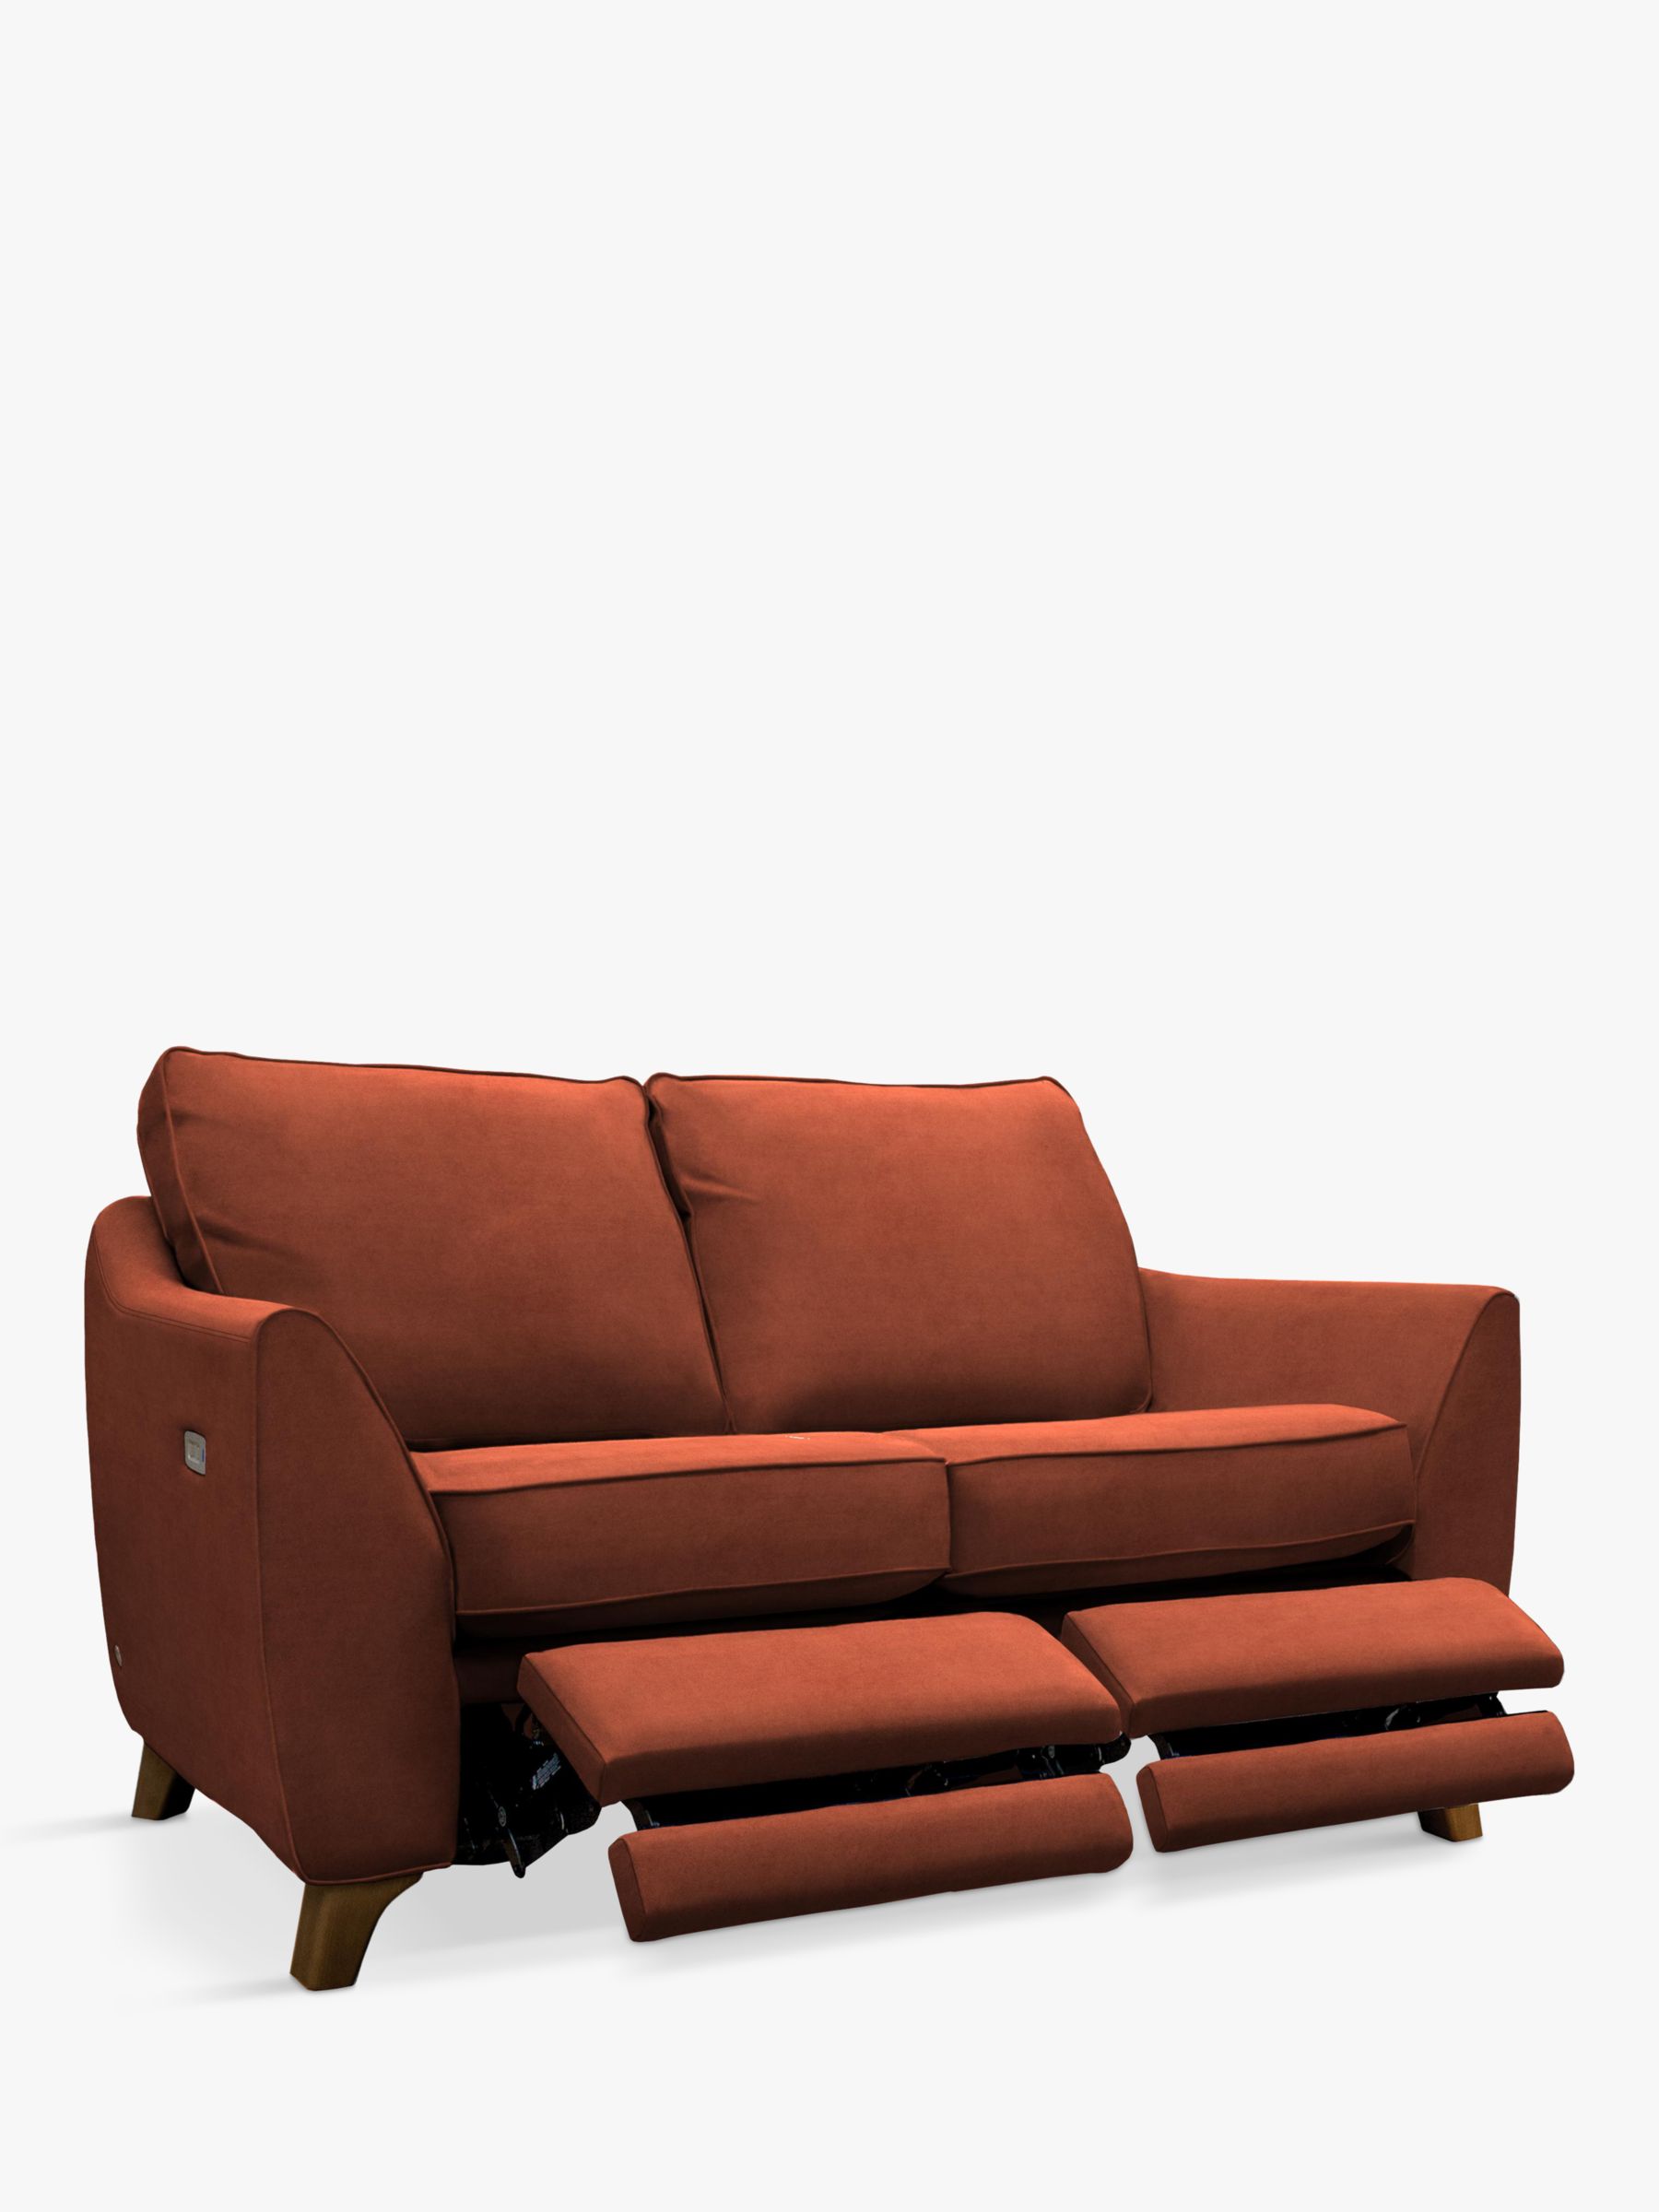 The Sixty Eight Range, G Plan Vintage The Sixty Eight Small 2 Seater Sofa with Double Footrest Mechanism, Plush Umber